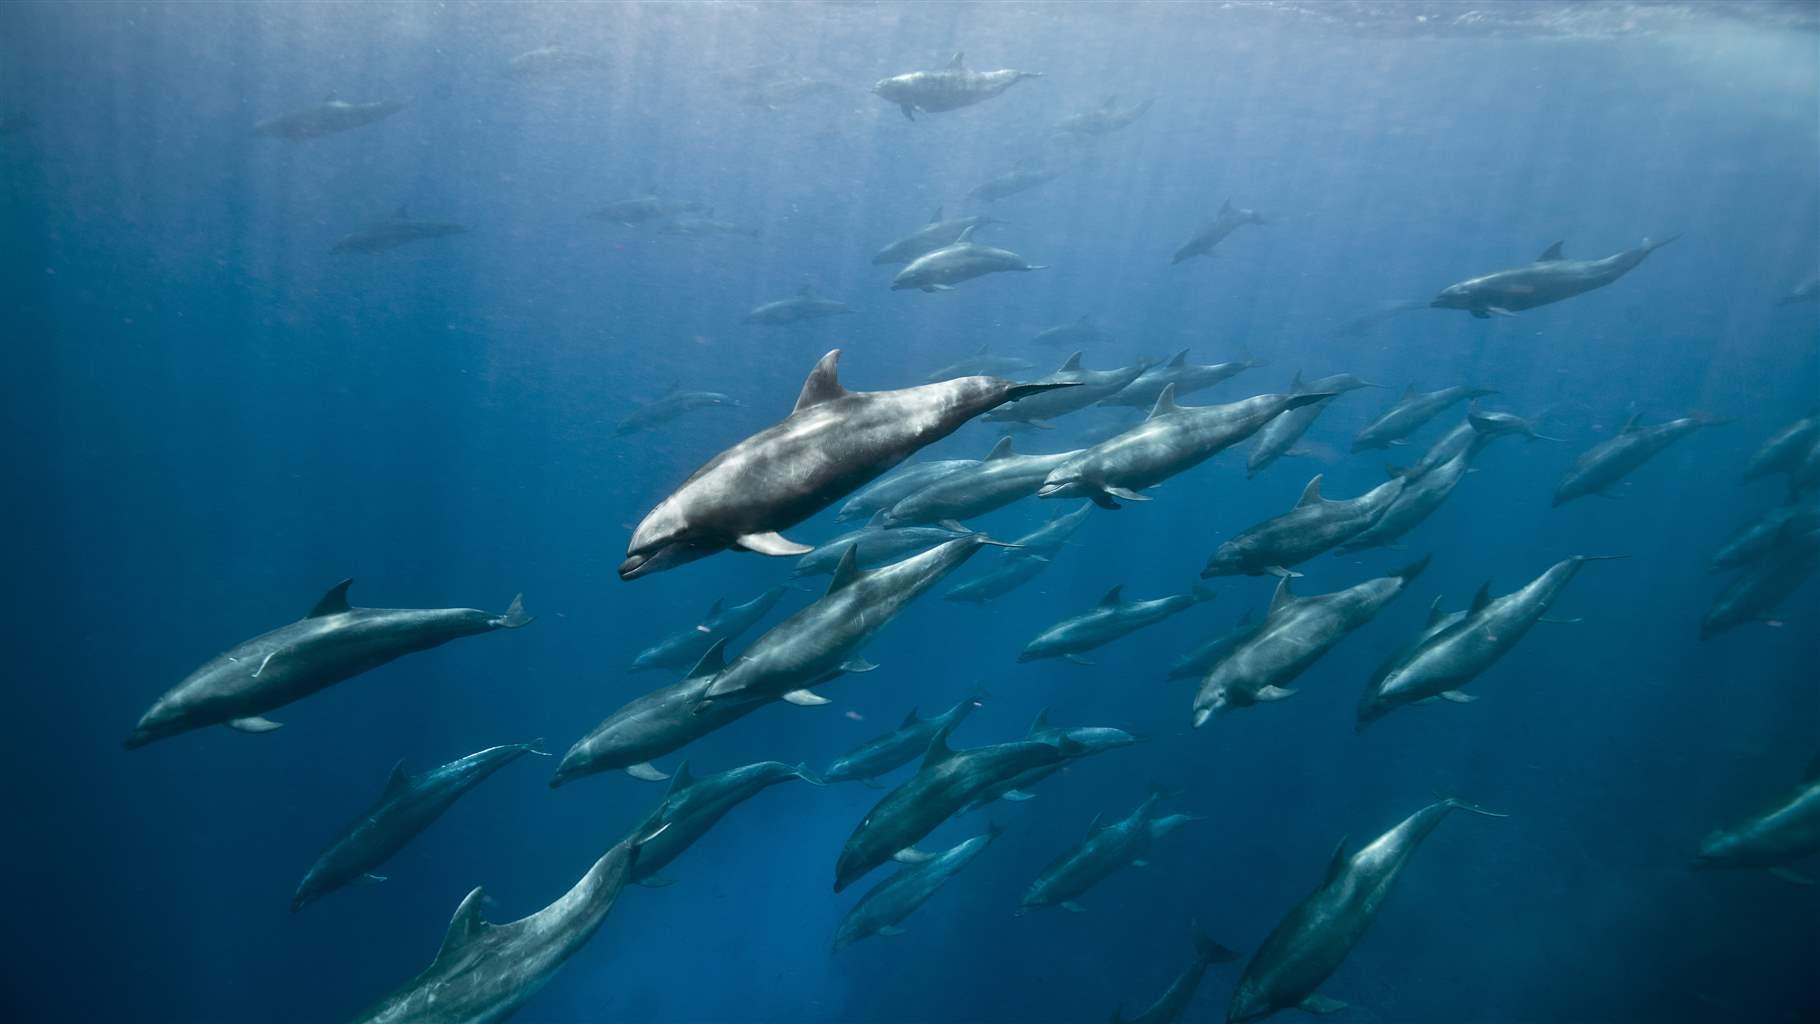 Bottlenose dolphins swim off the shores of the Galápagos Islands, one of the inaugural sites utilizing Global Fishing Watch’s new marine management tool.  